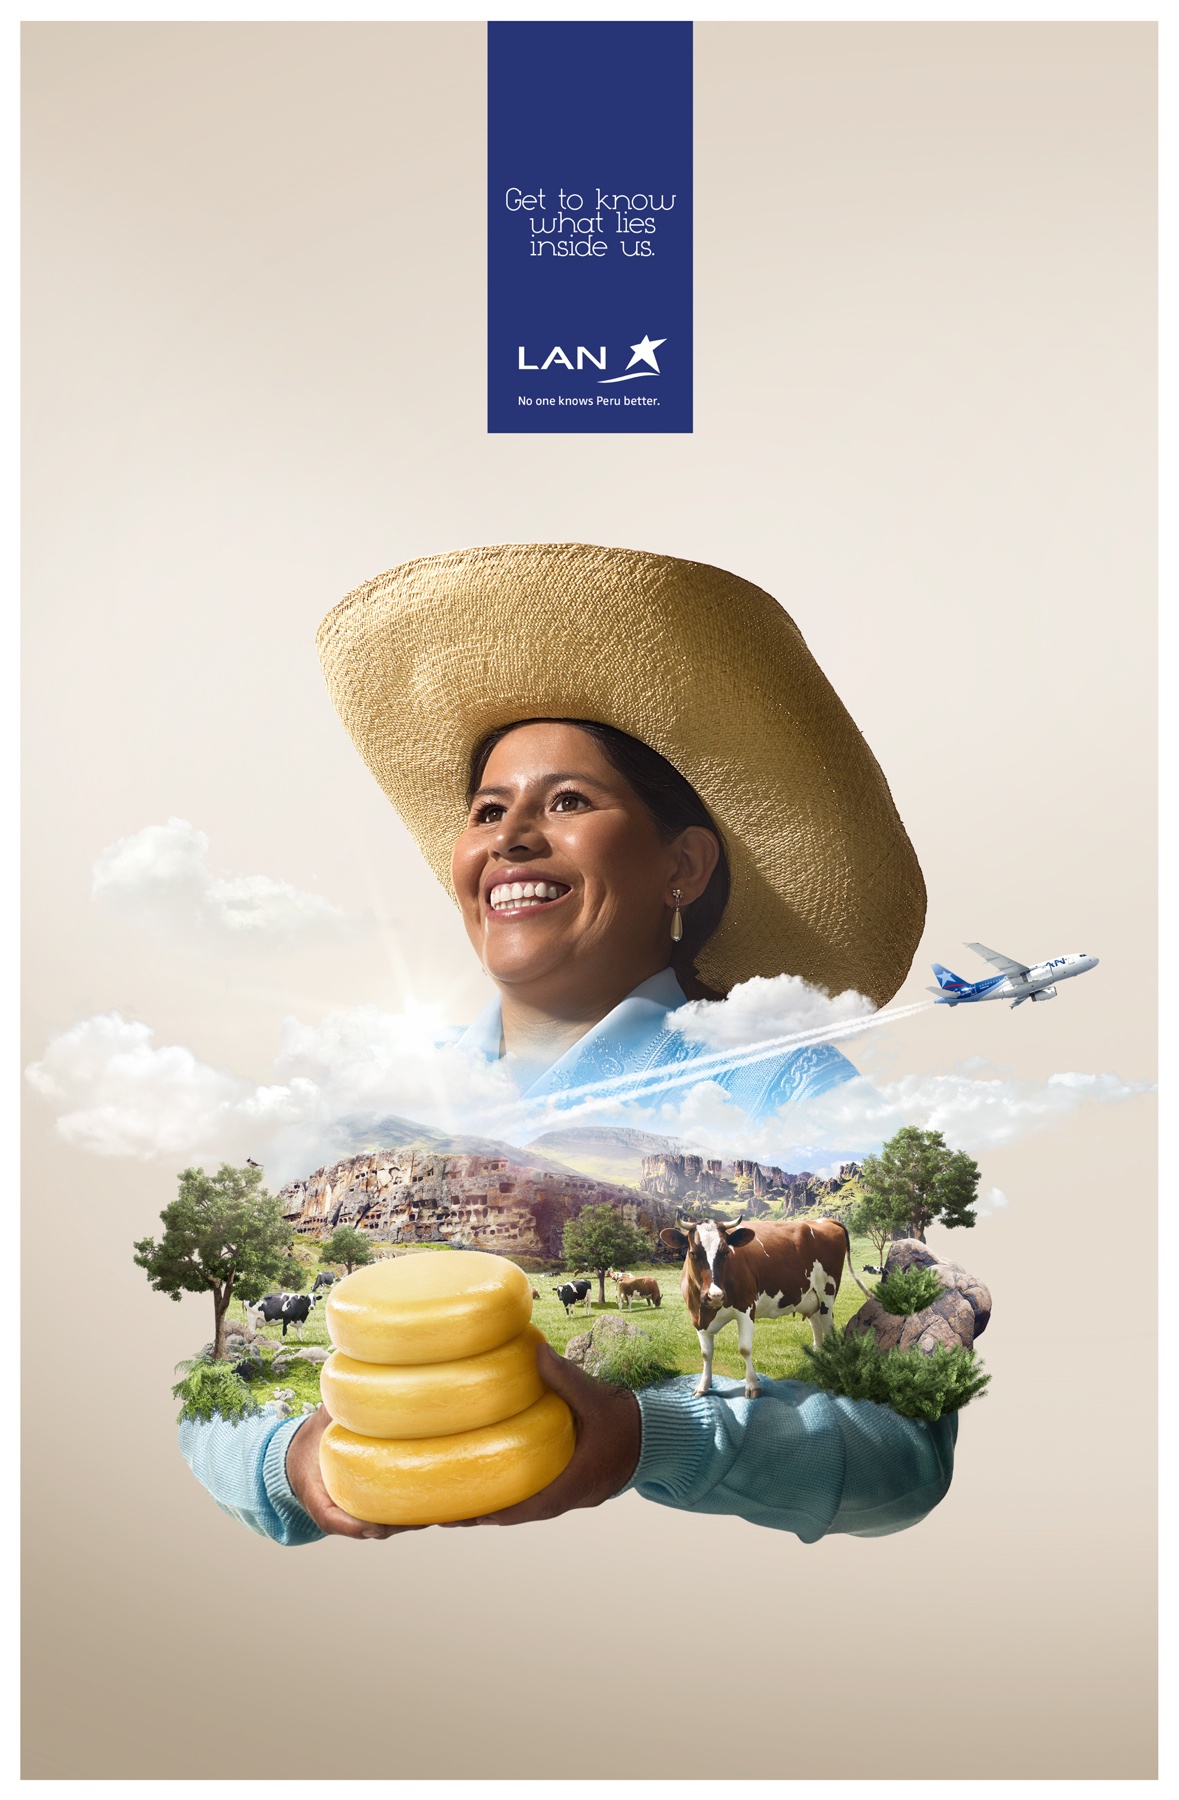 LAN Airlines: No one knows Peru better